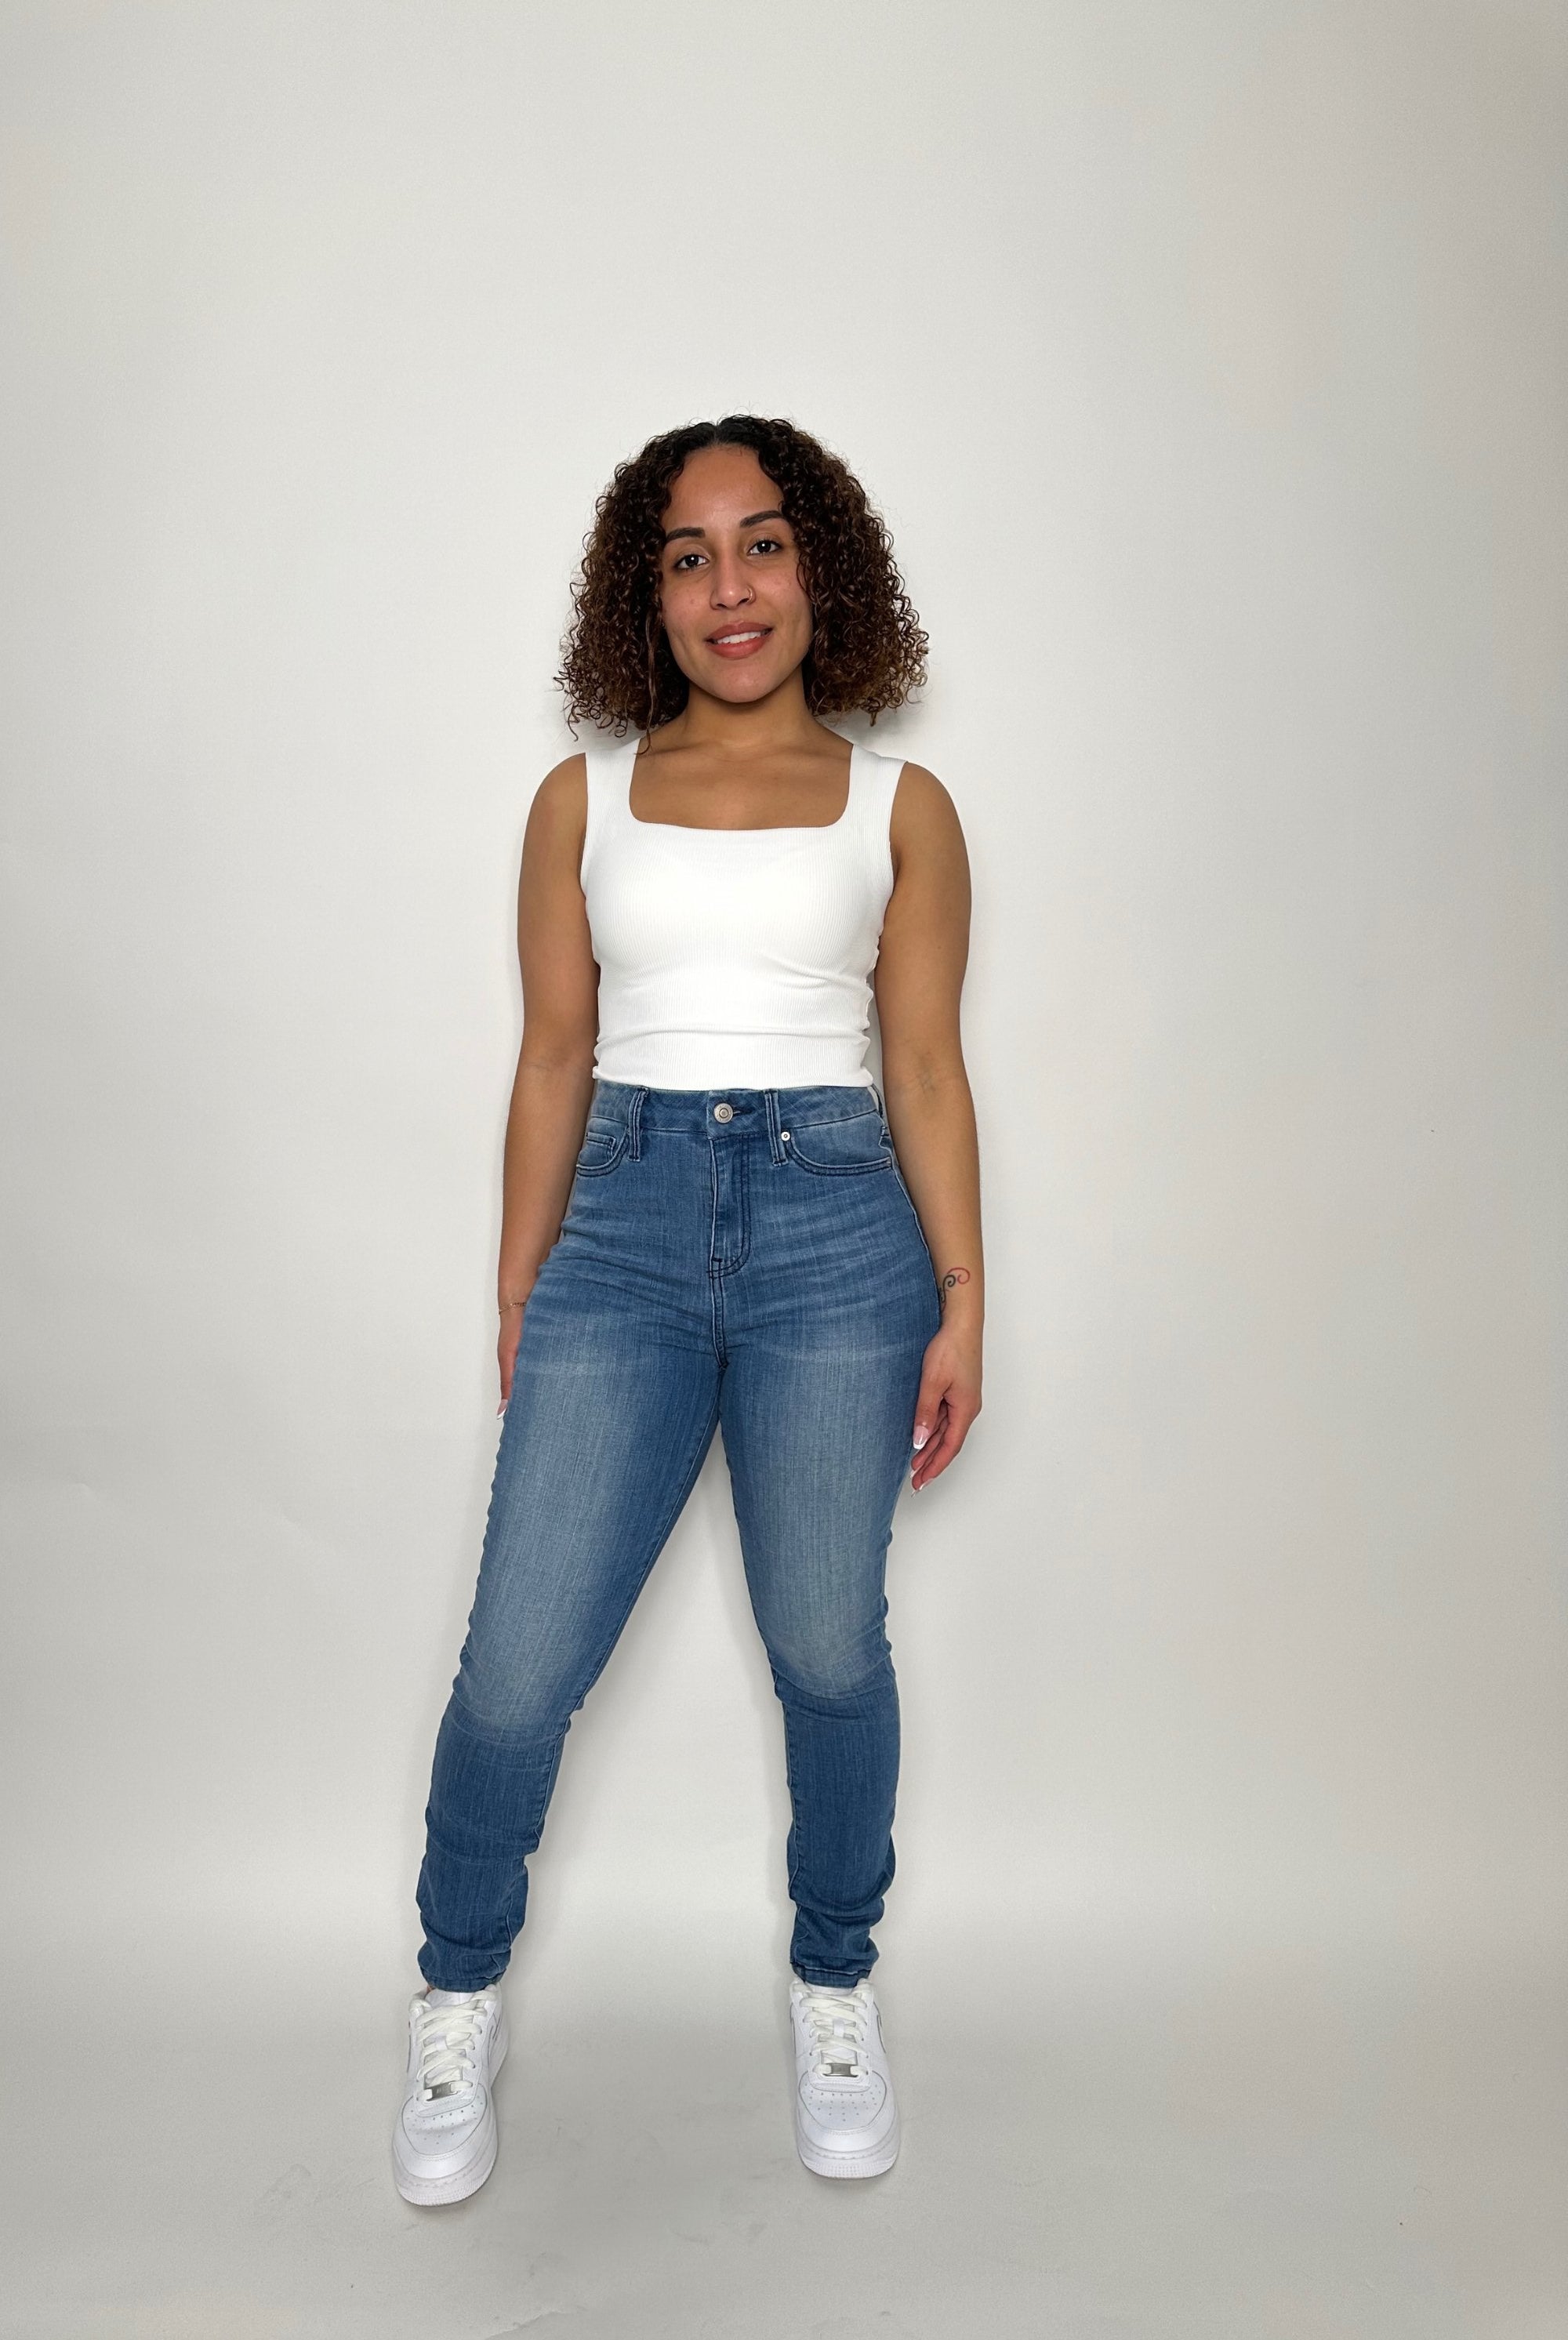 NatxCustomStyle Jeans  | Skinny Jean | High-Rise Jeans